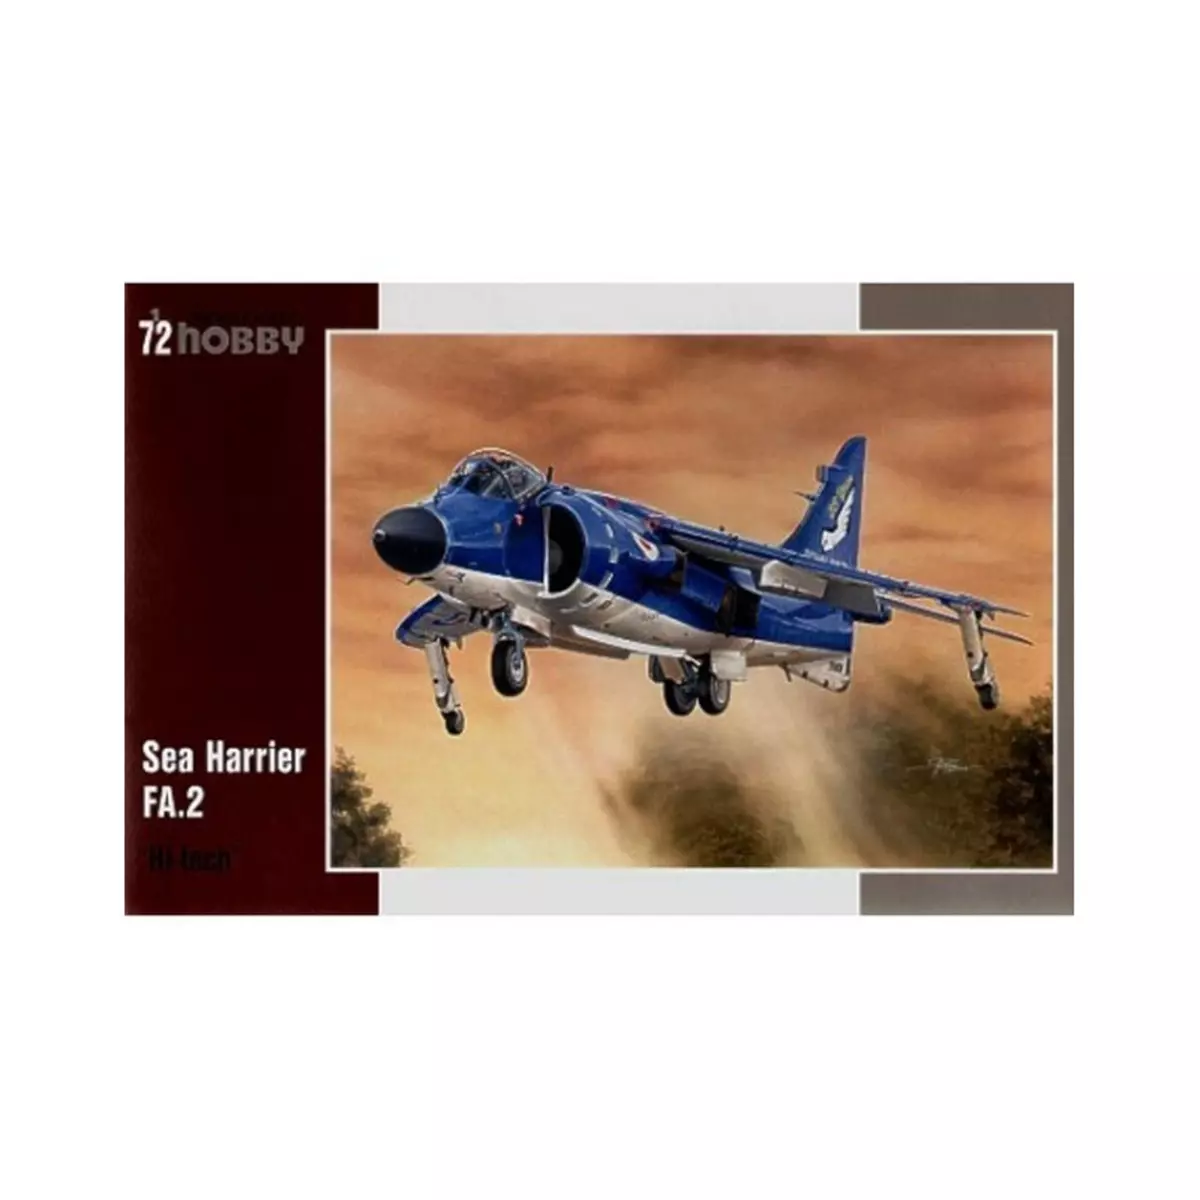 Special Hobby Maquette avion militaire : Sea Harrier FA.2 High Tech